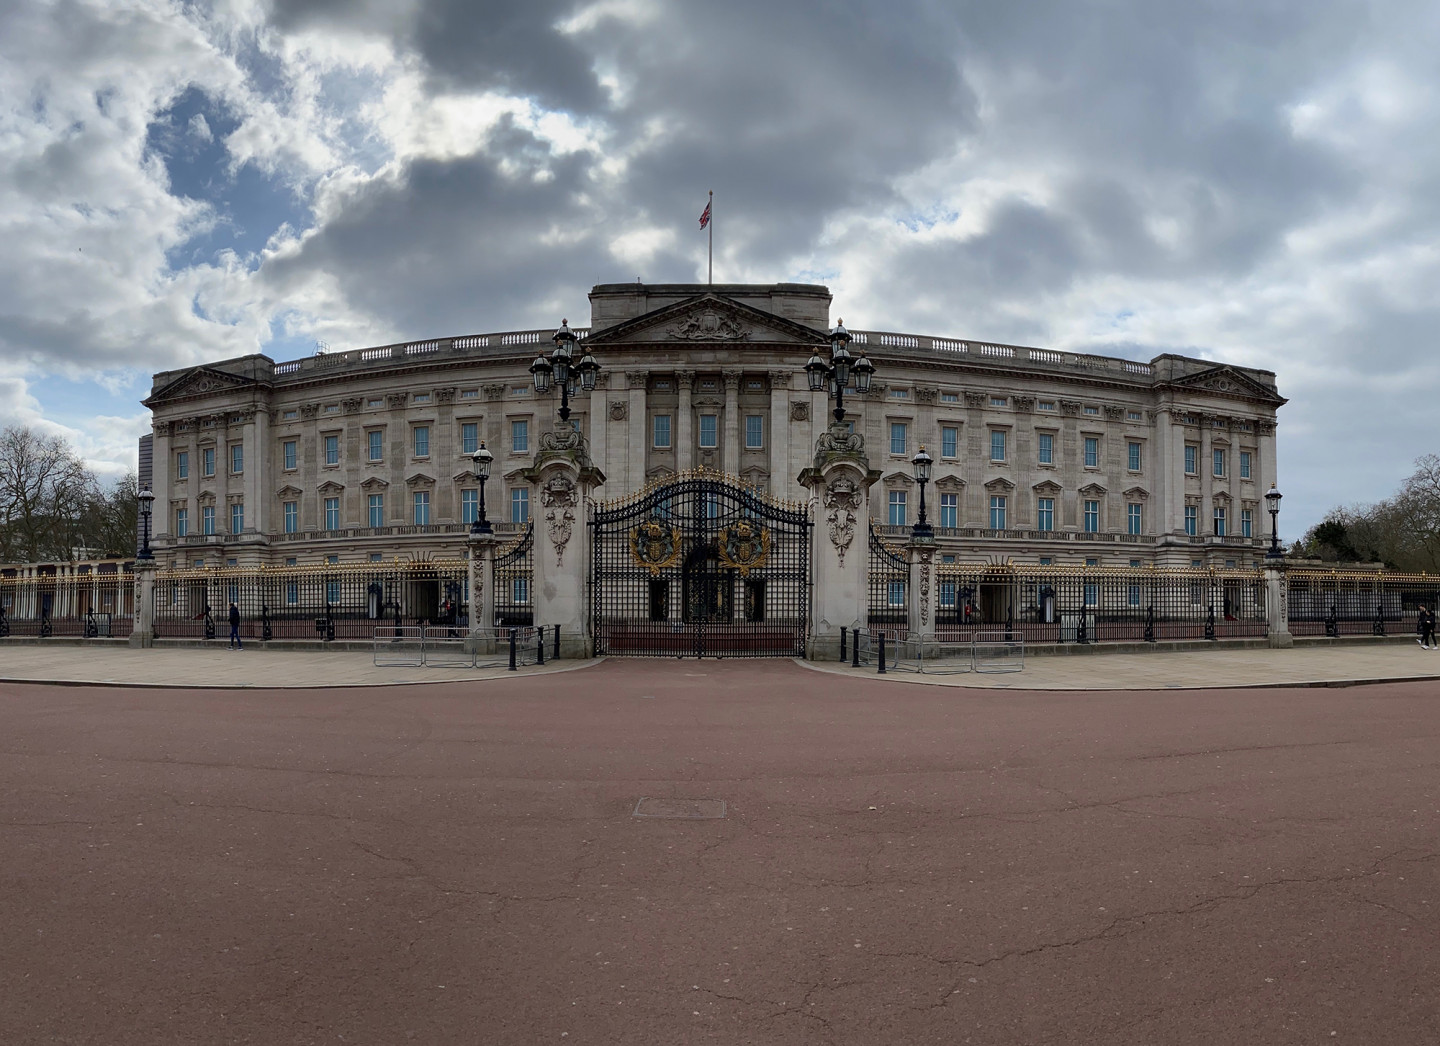 Taken on 28th March while cycling past Buckingham Palace. © Adam Becksmith